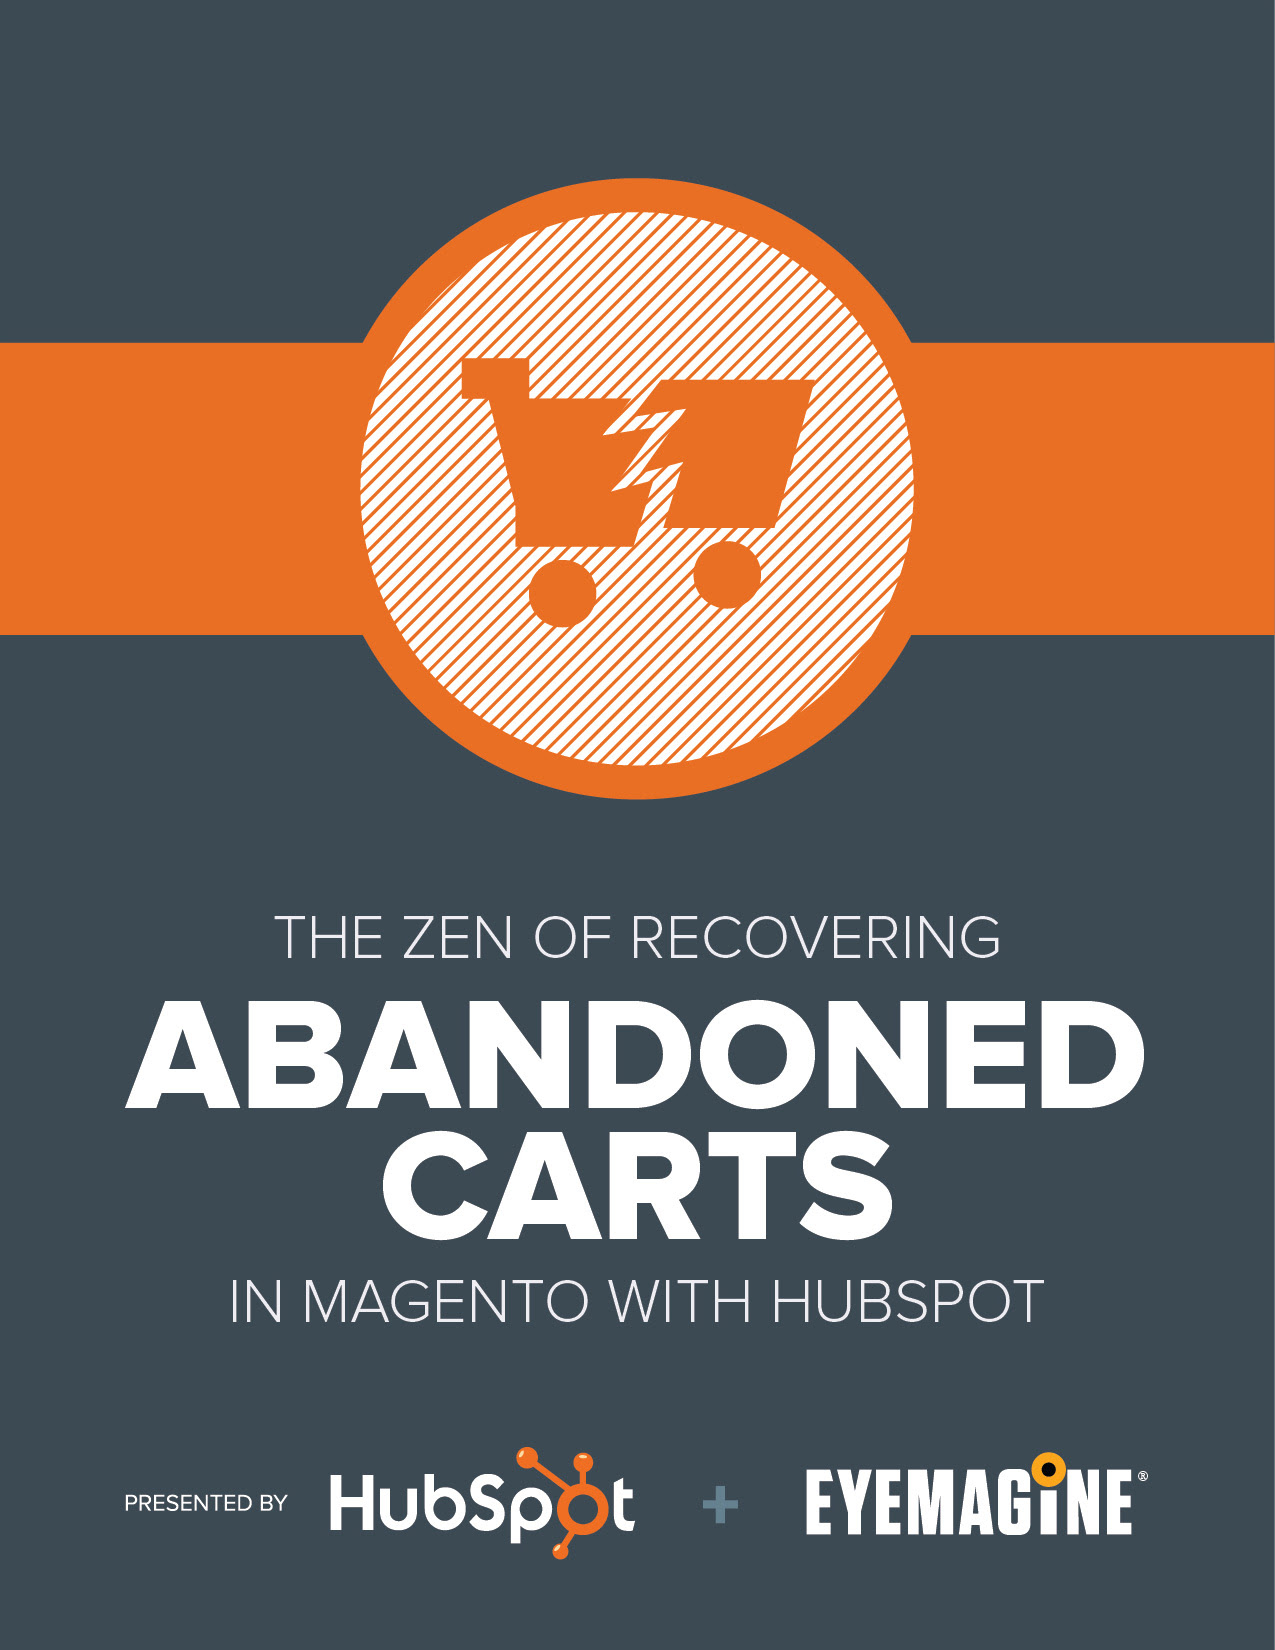 Shopping Cart Abandonment: Why it Occurs and How to Combat It